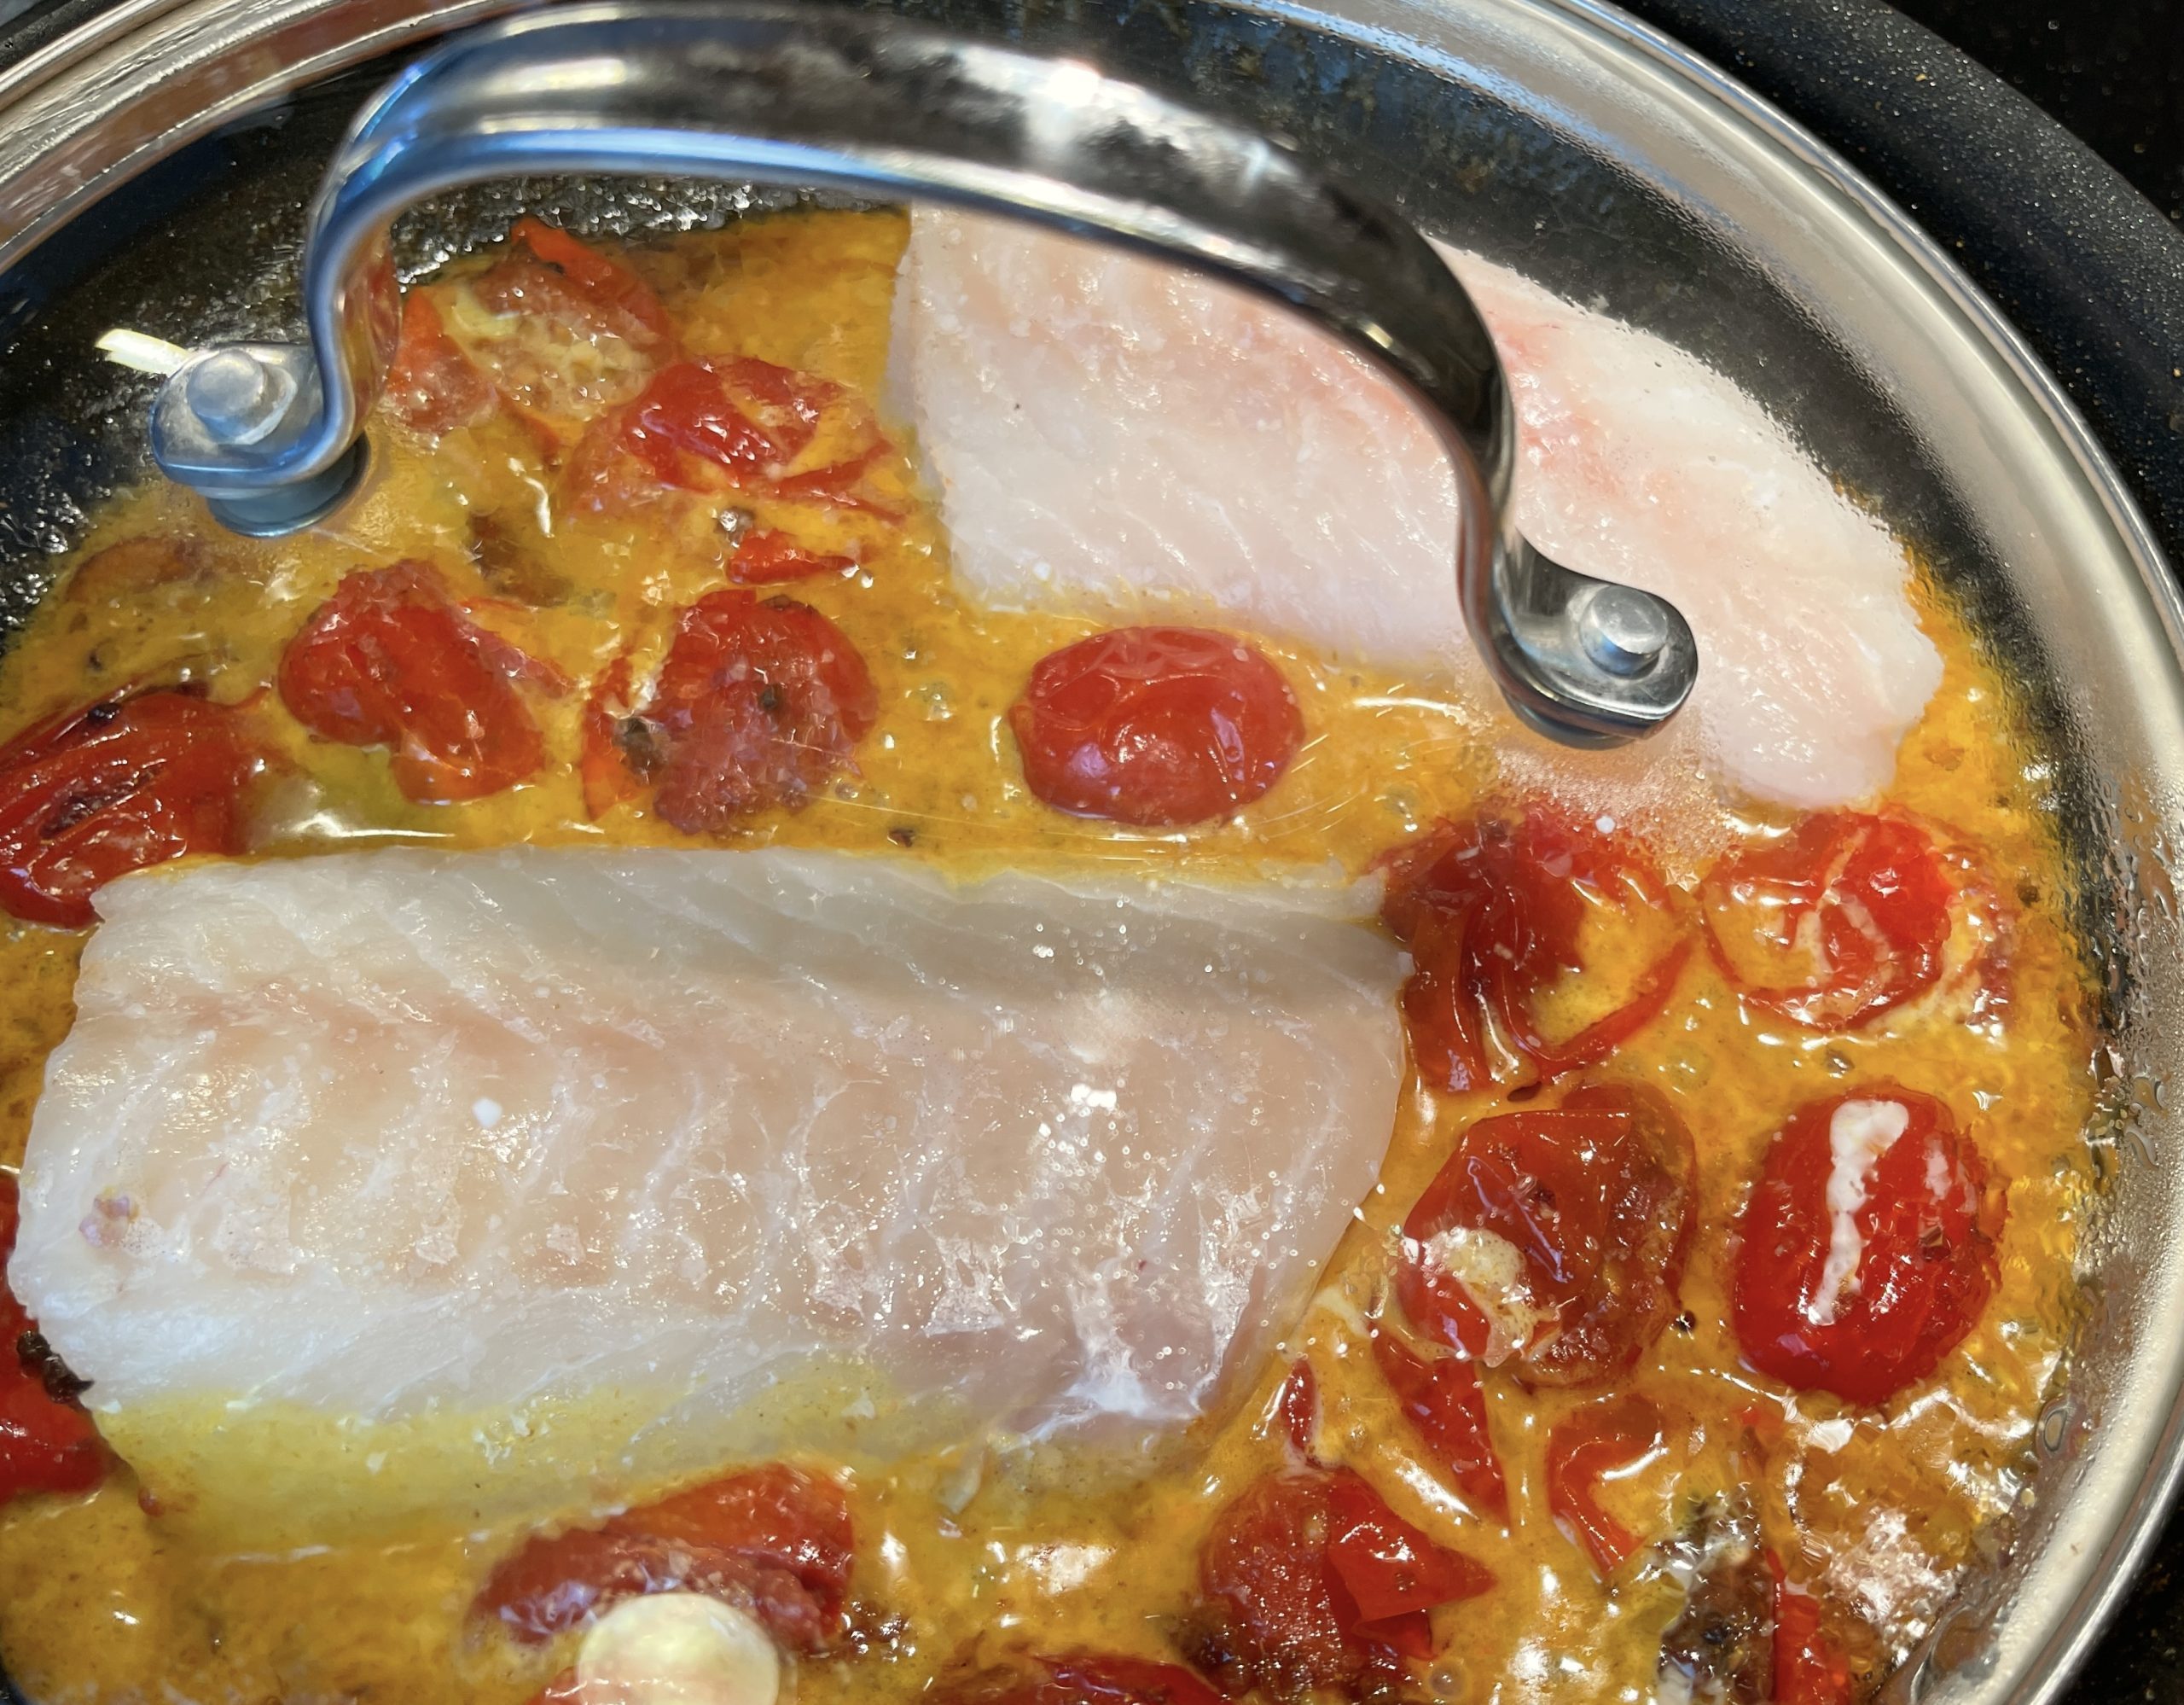 Reduce heat to medium-low.  Season fish with salt on both sides and then nestle into curry.  Cover and cook at a low simmer for 5-7 minutes.